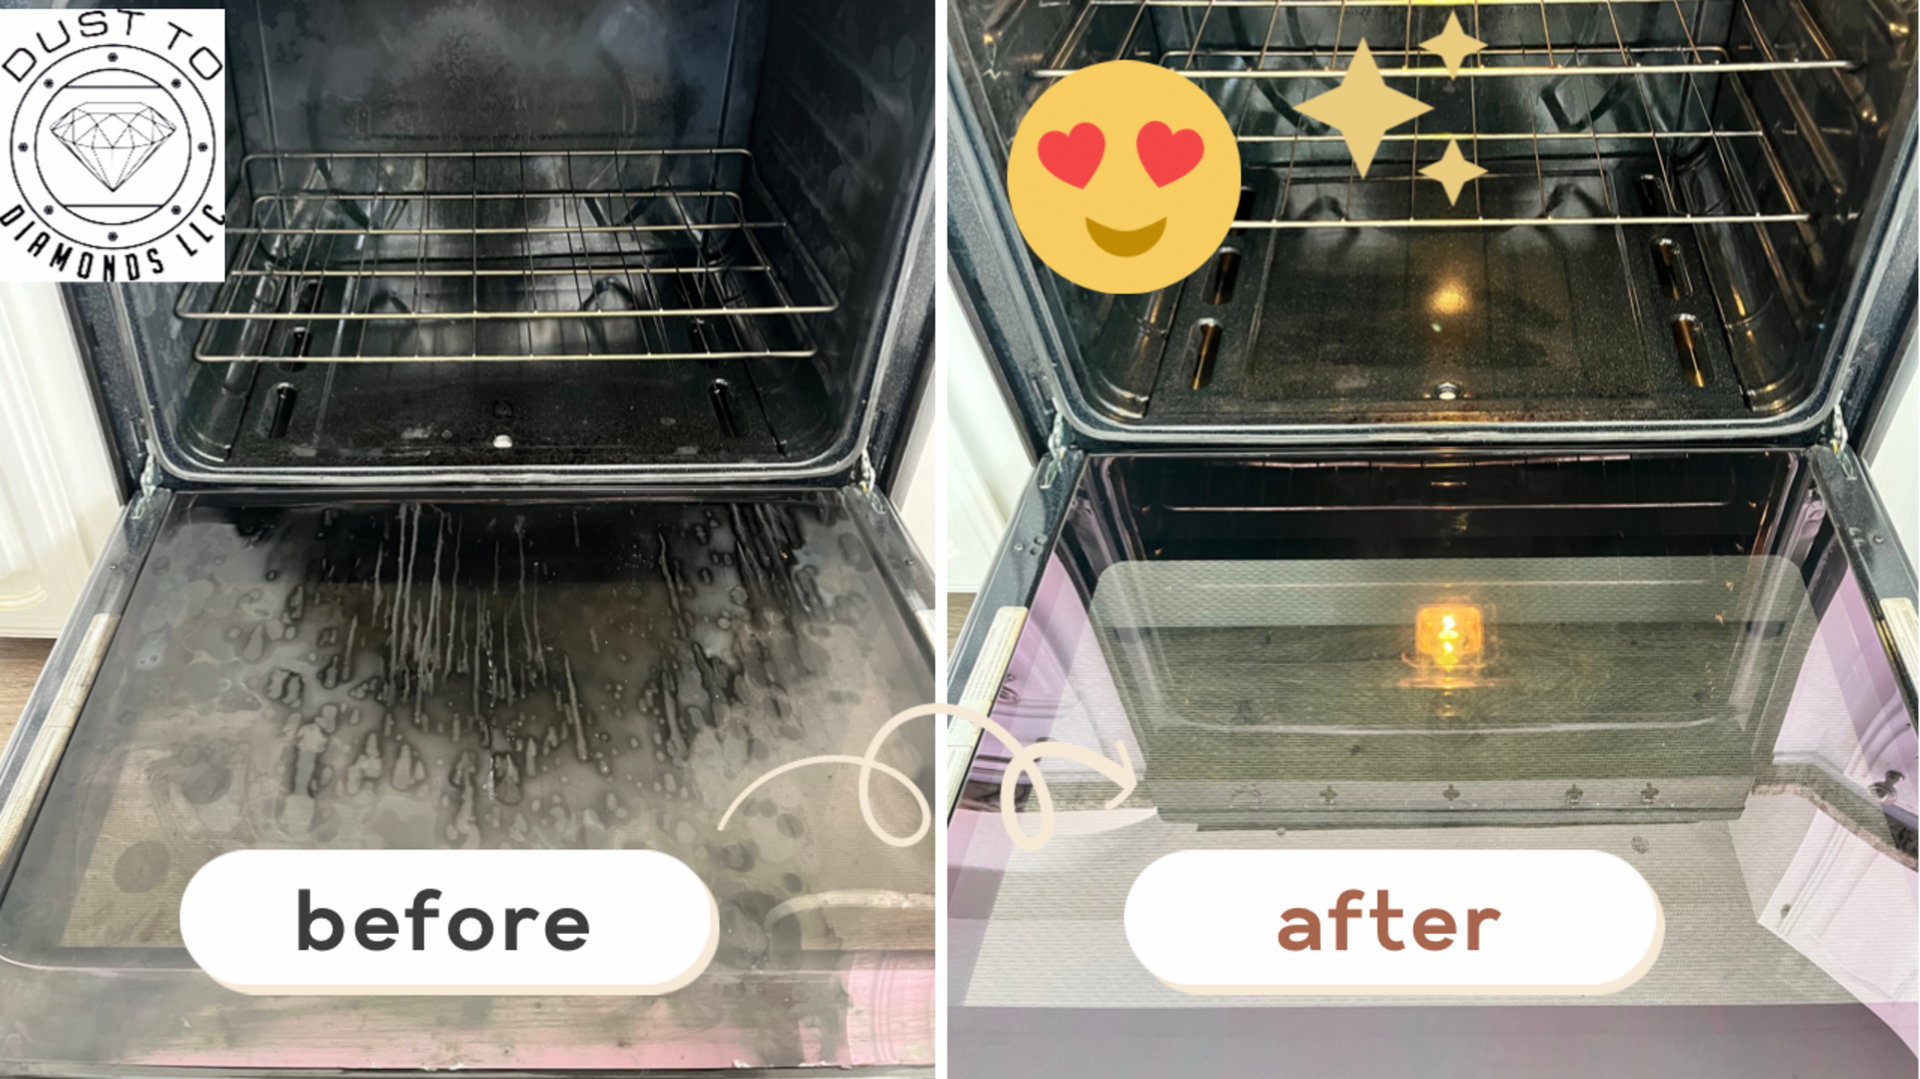 A before and after picture of a dirty oven and a clean oven.